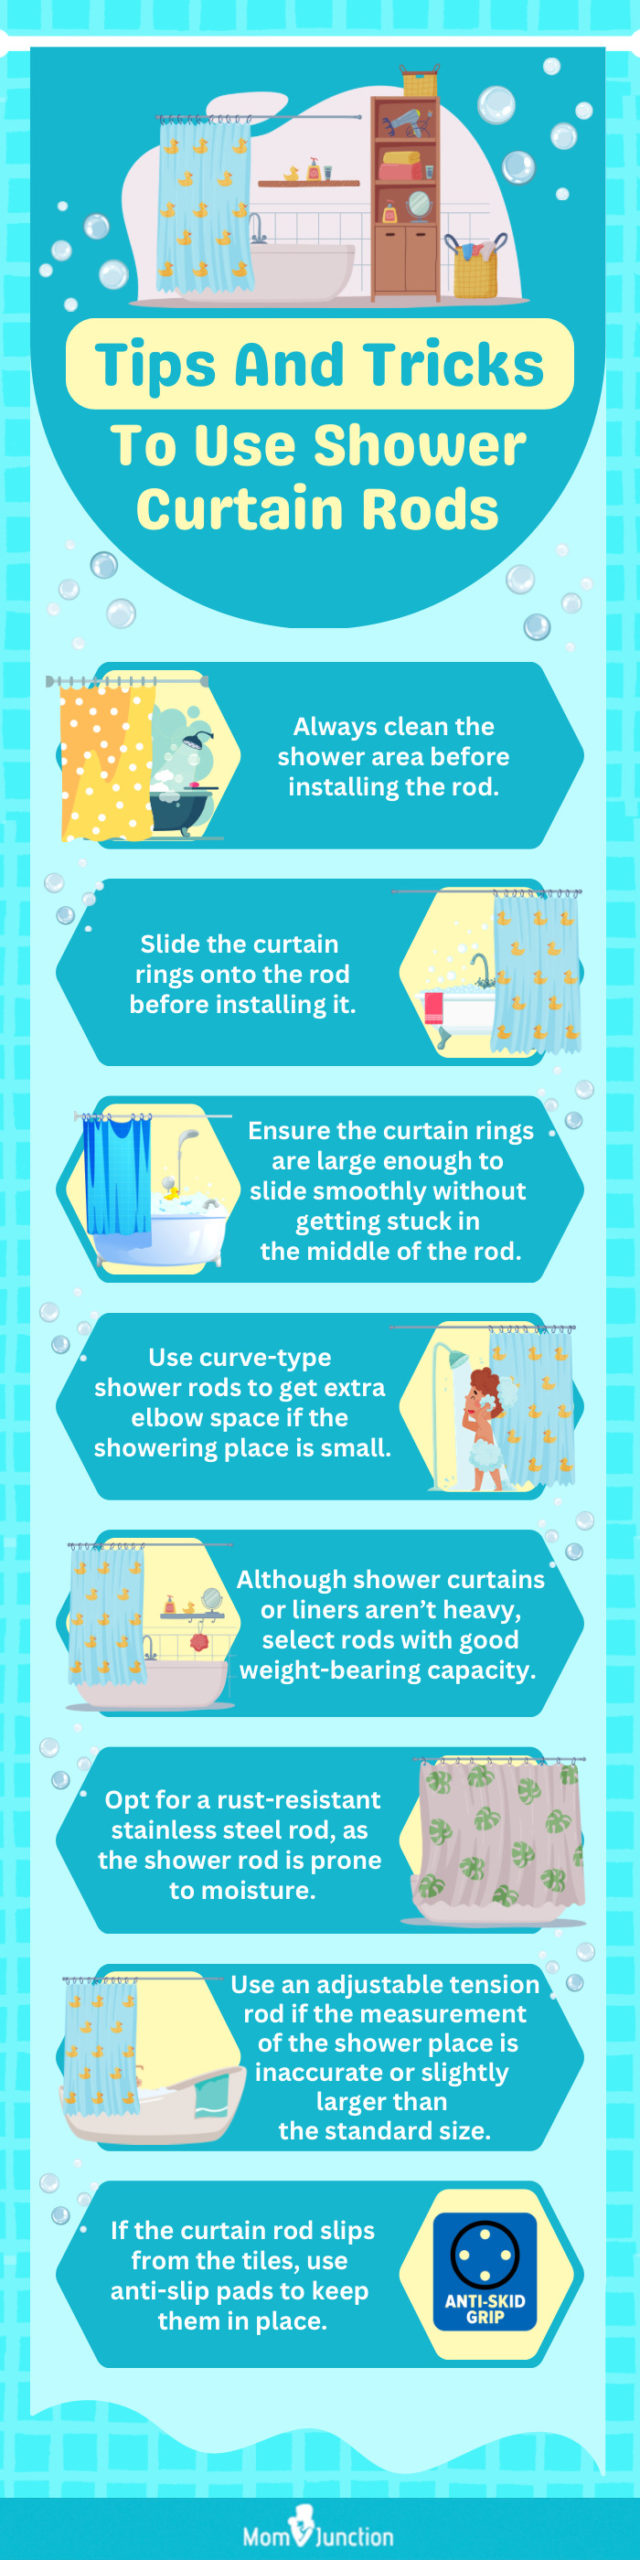 Tips And Tricks To Use Shower Curtain Rods